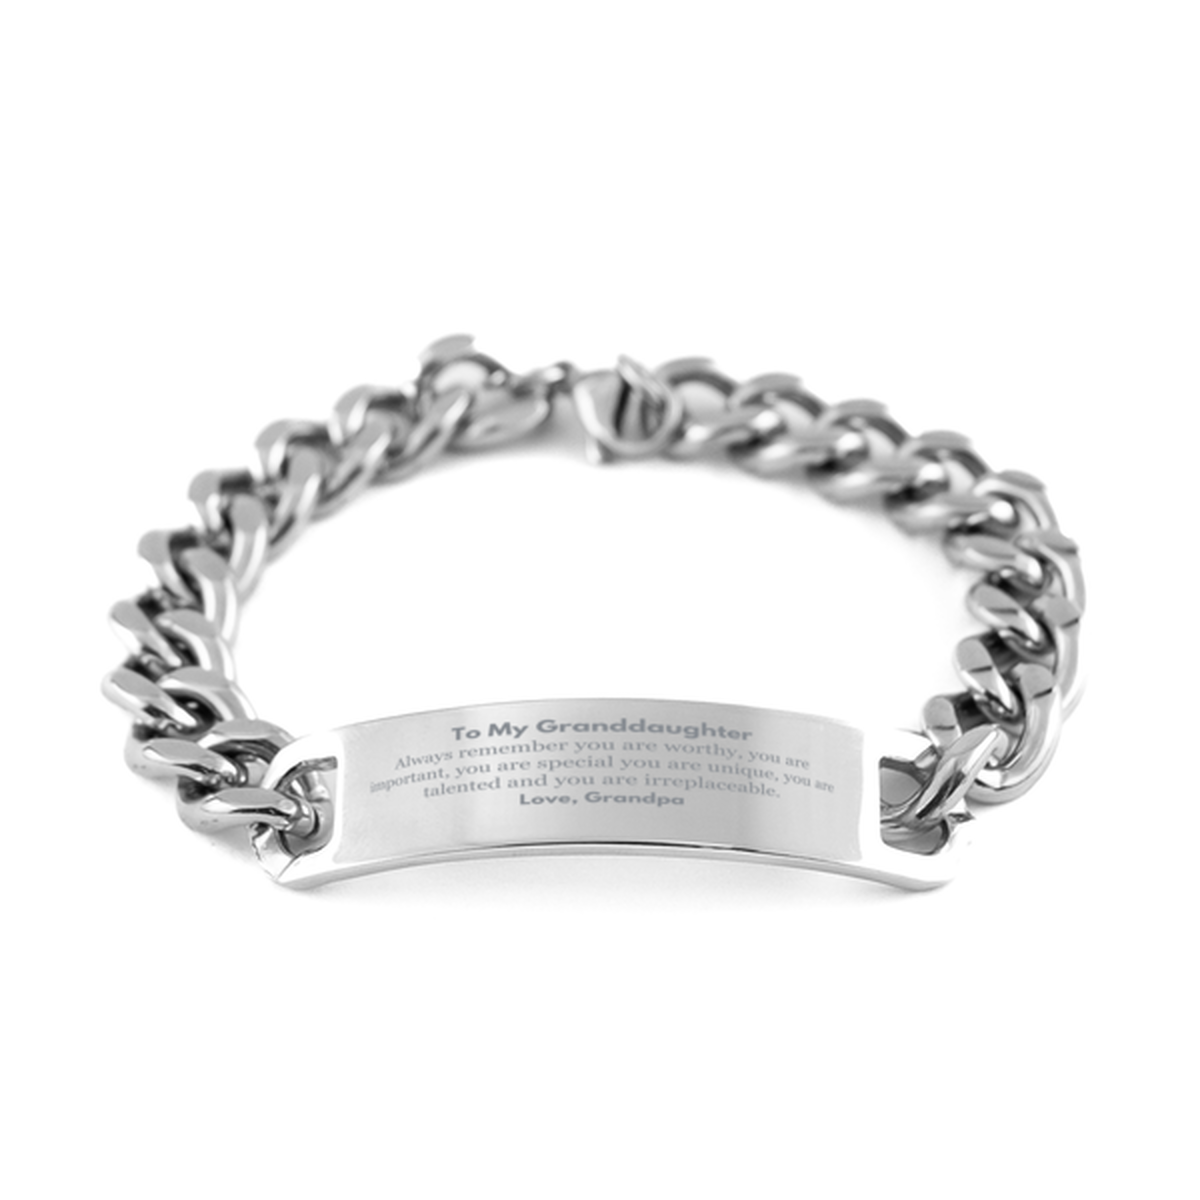 Granddaughter Birthday Gifts from Grandpa, Inspirational Cuban Chain Stainless Steel Bracelet for Granddaughter Christmas Graduation Gifts for Granddaughter Always remember you are worthy, you are important. Love, Grandpa